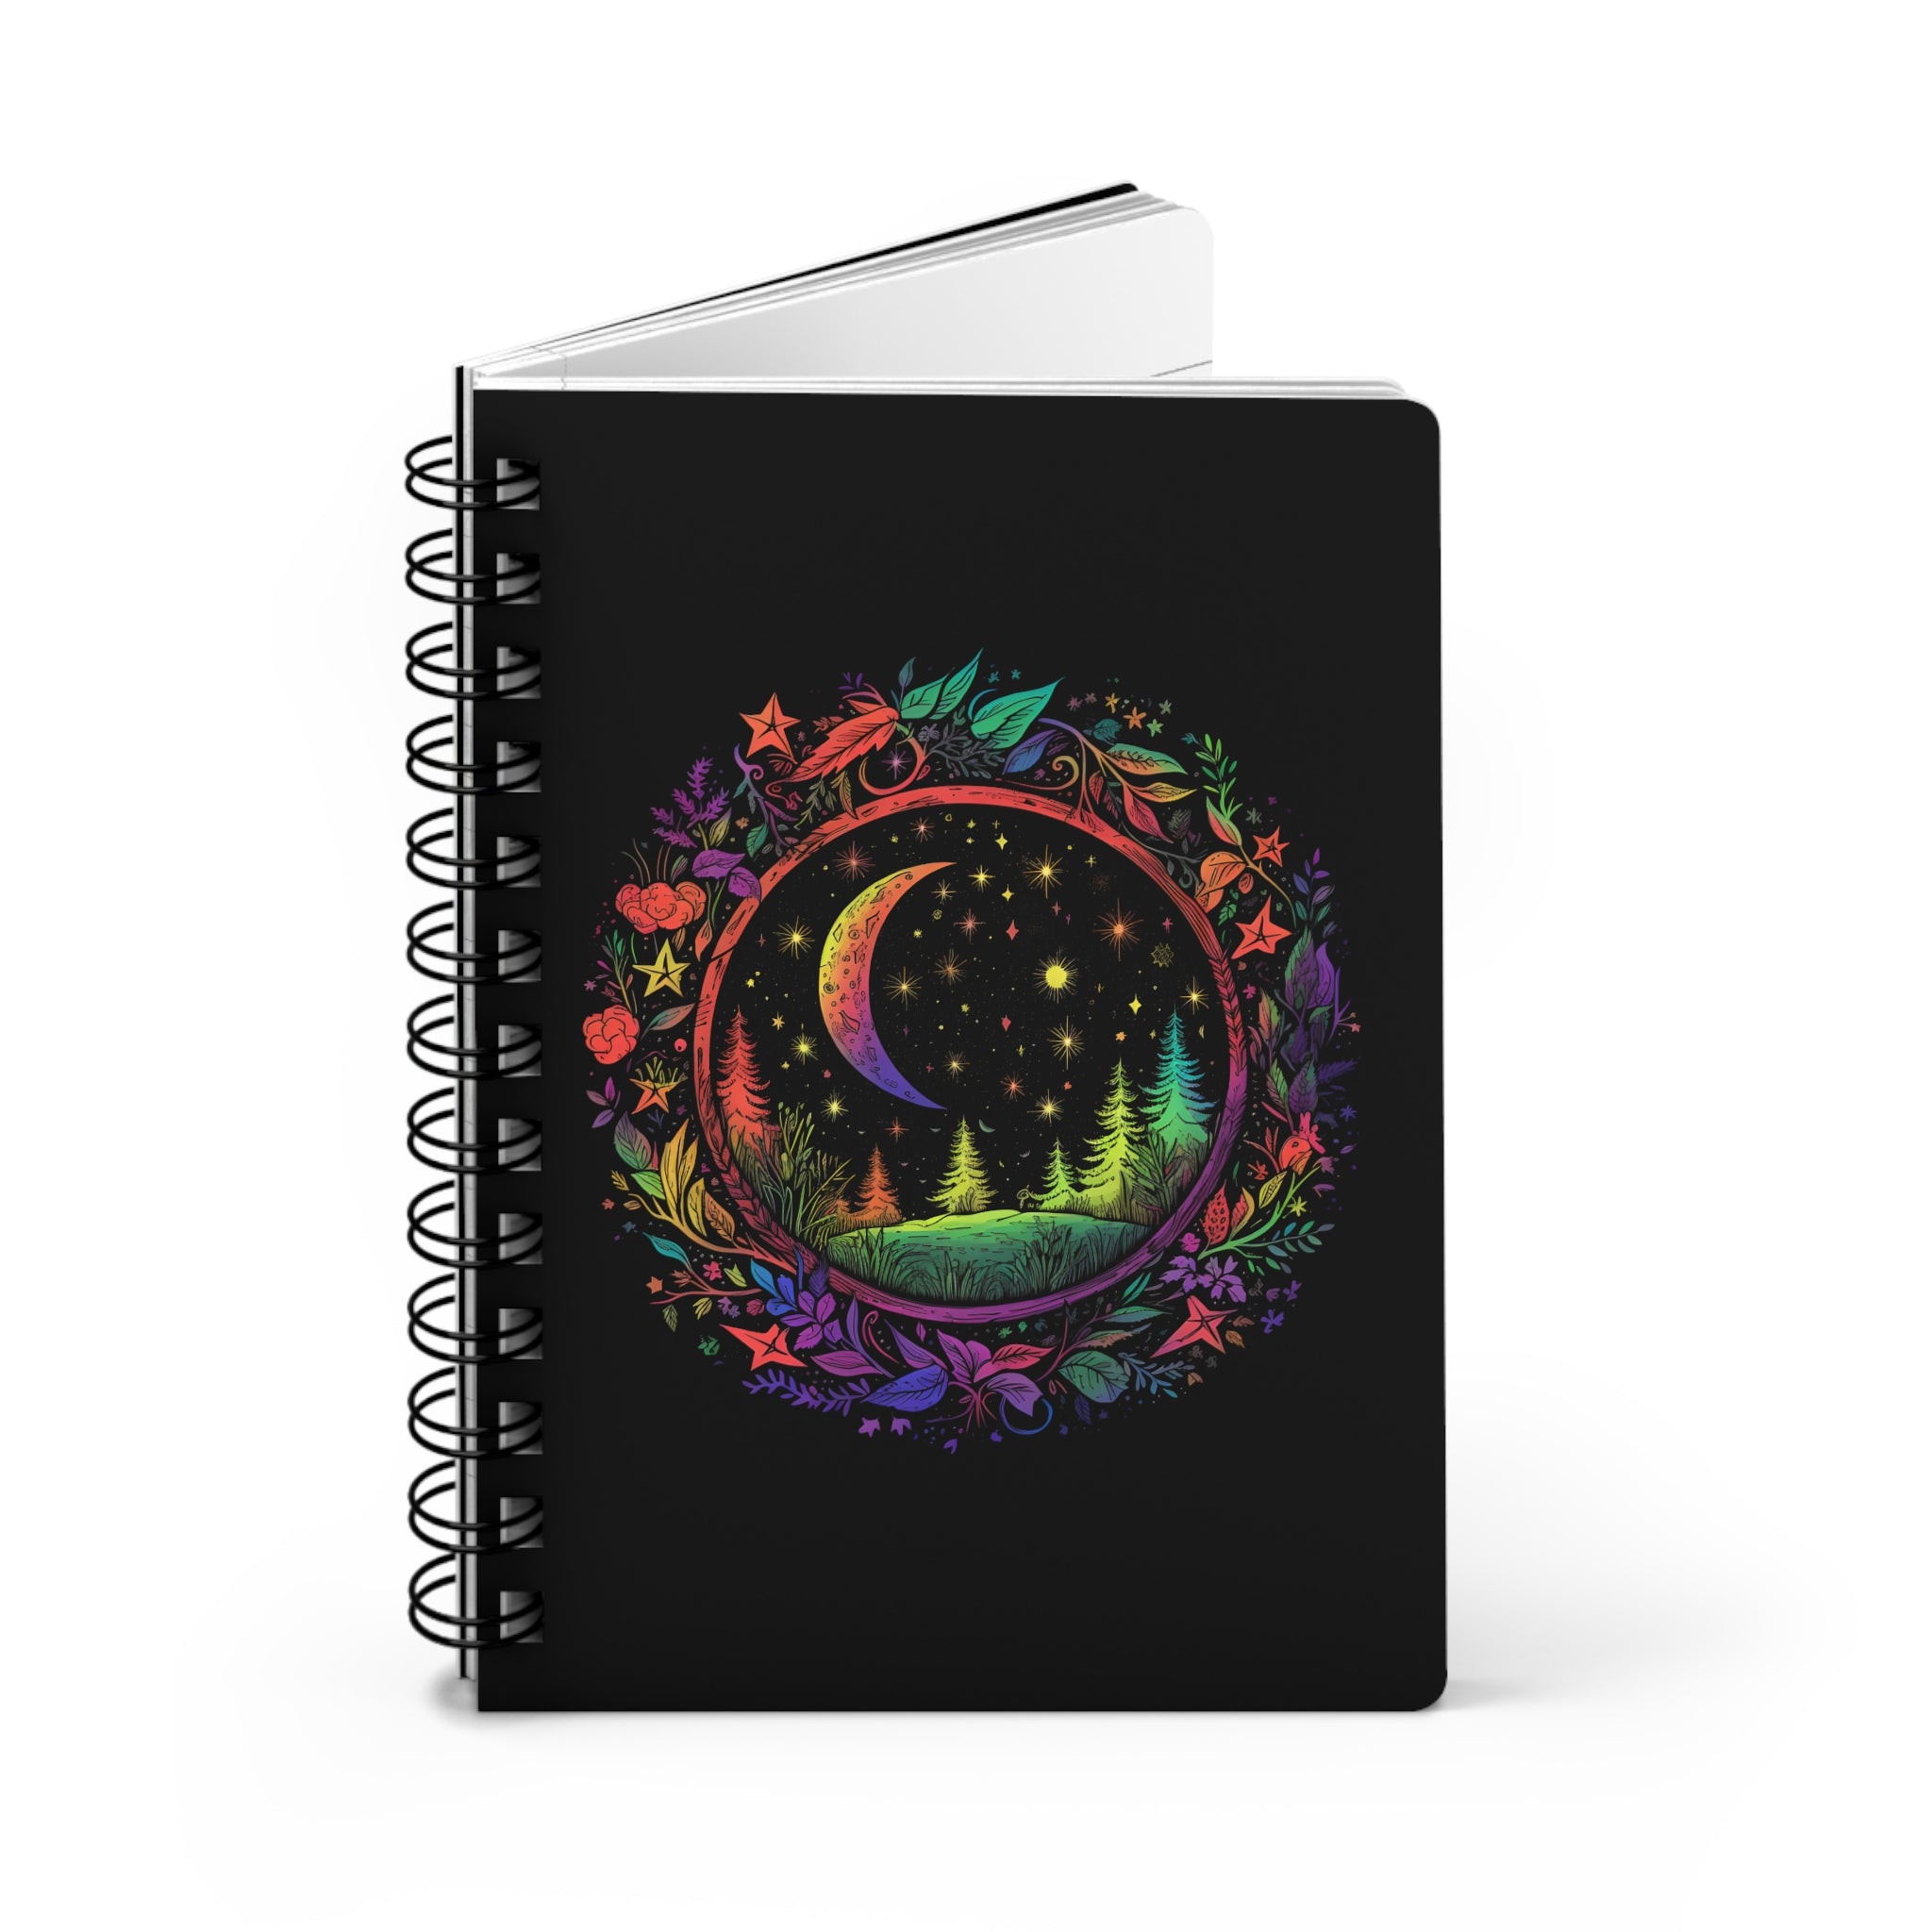 Celestial Neon Forest Spiral Notebook - Spiral Lined, 5 x 7 Inch